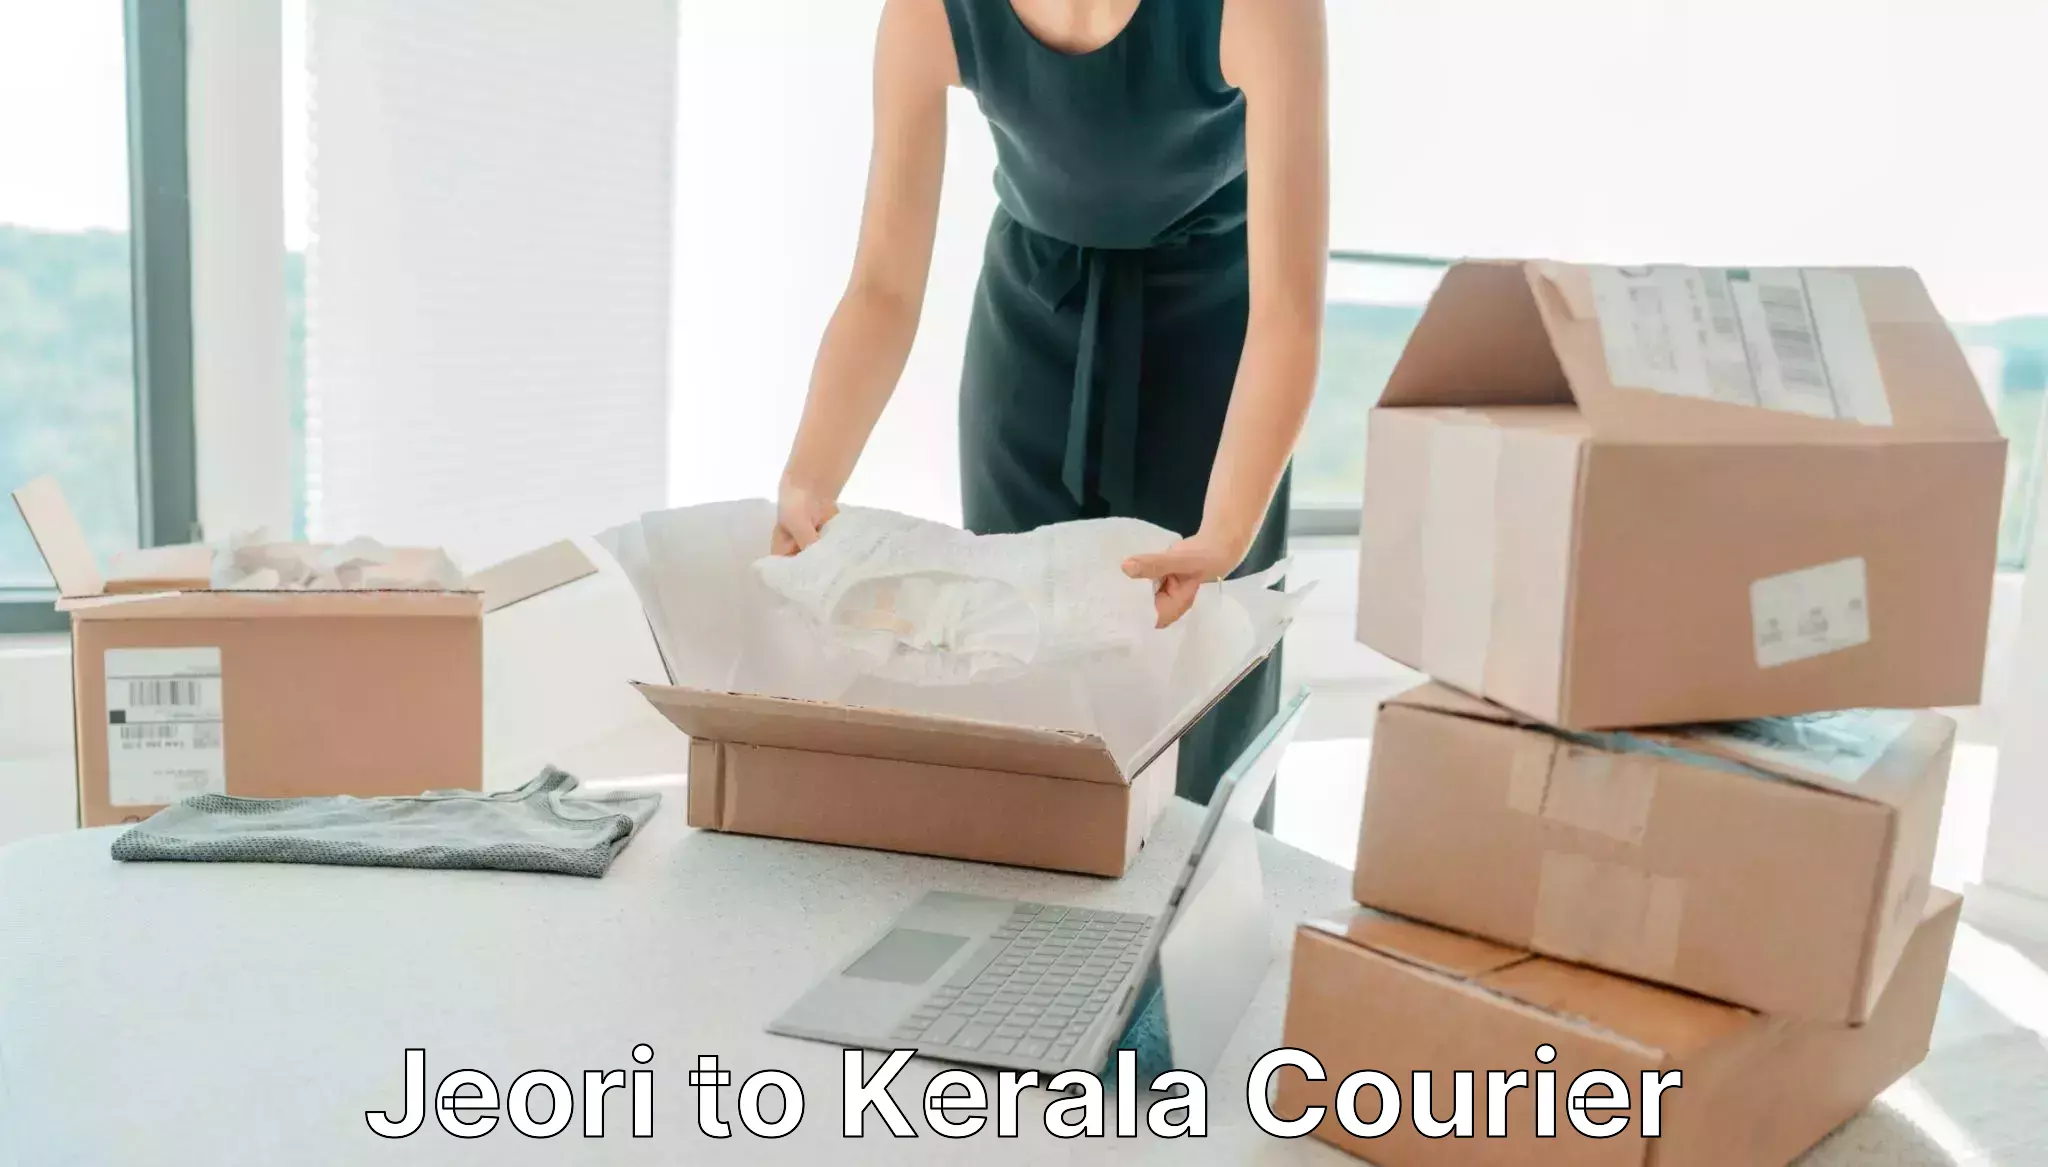 Secure package delivery Jeori to Kerala